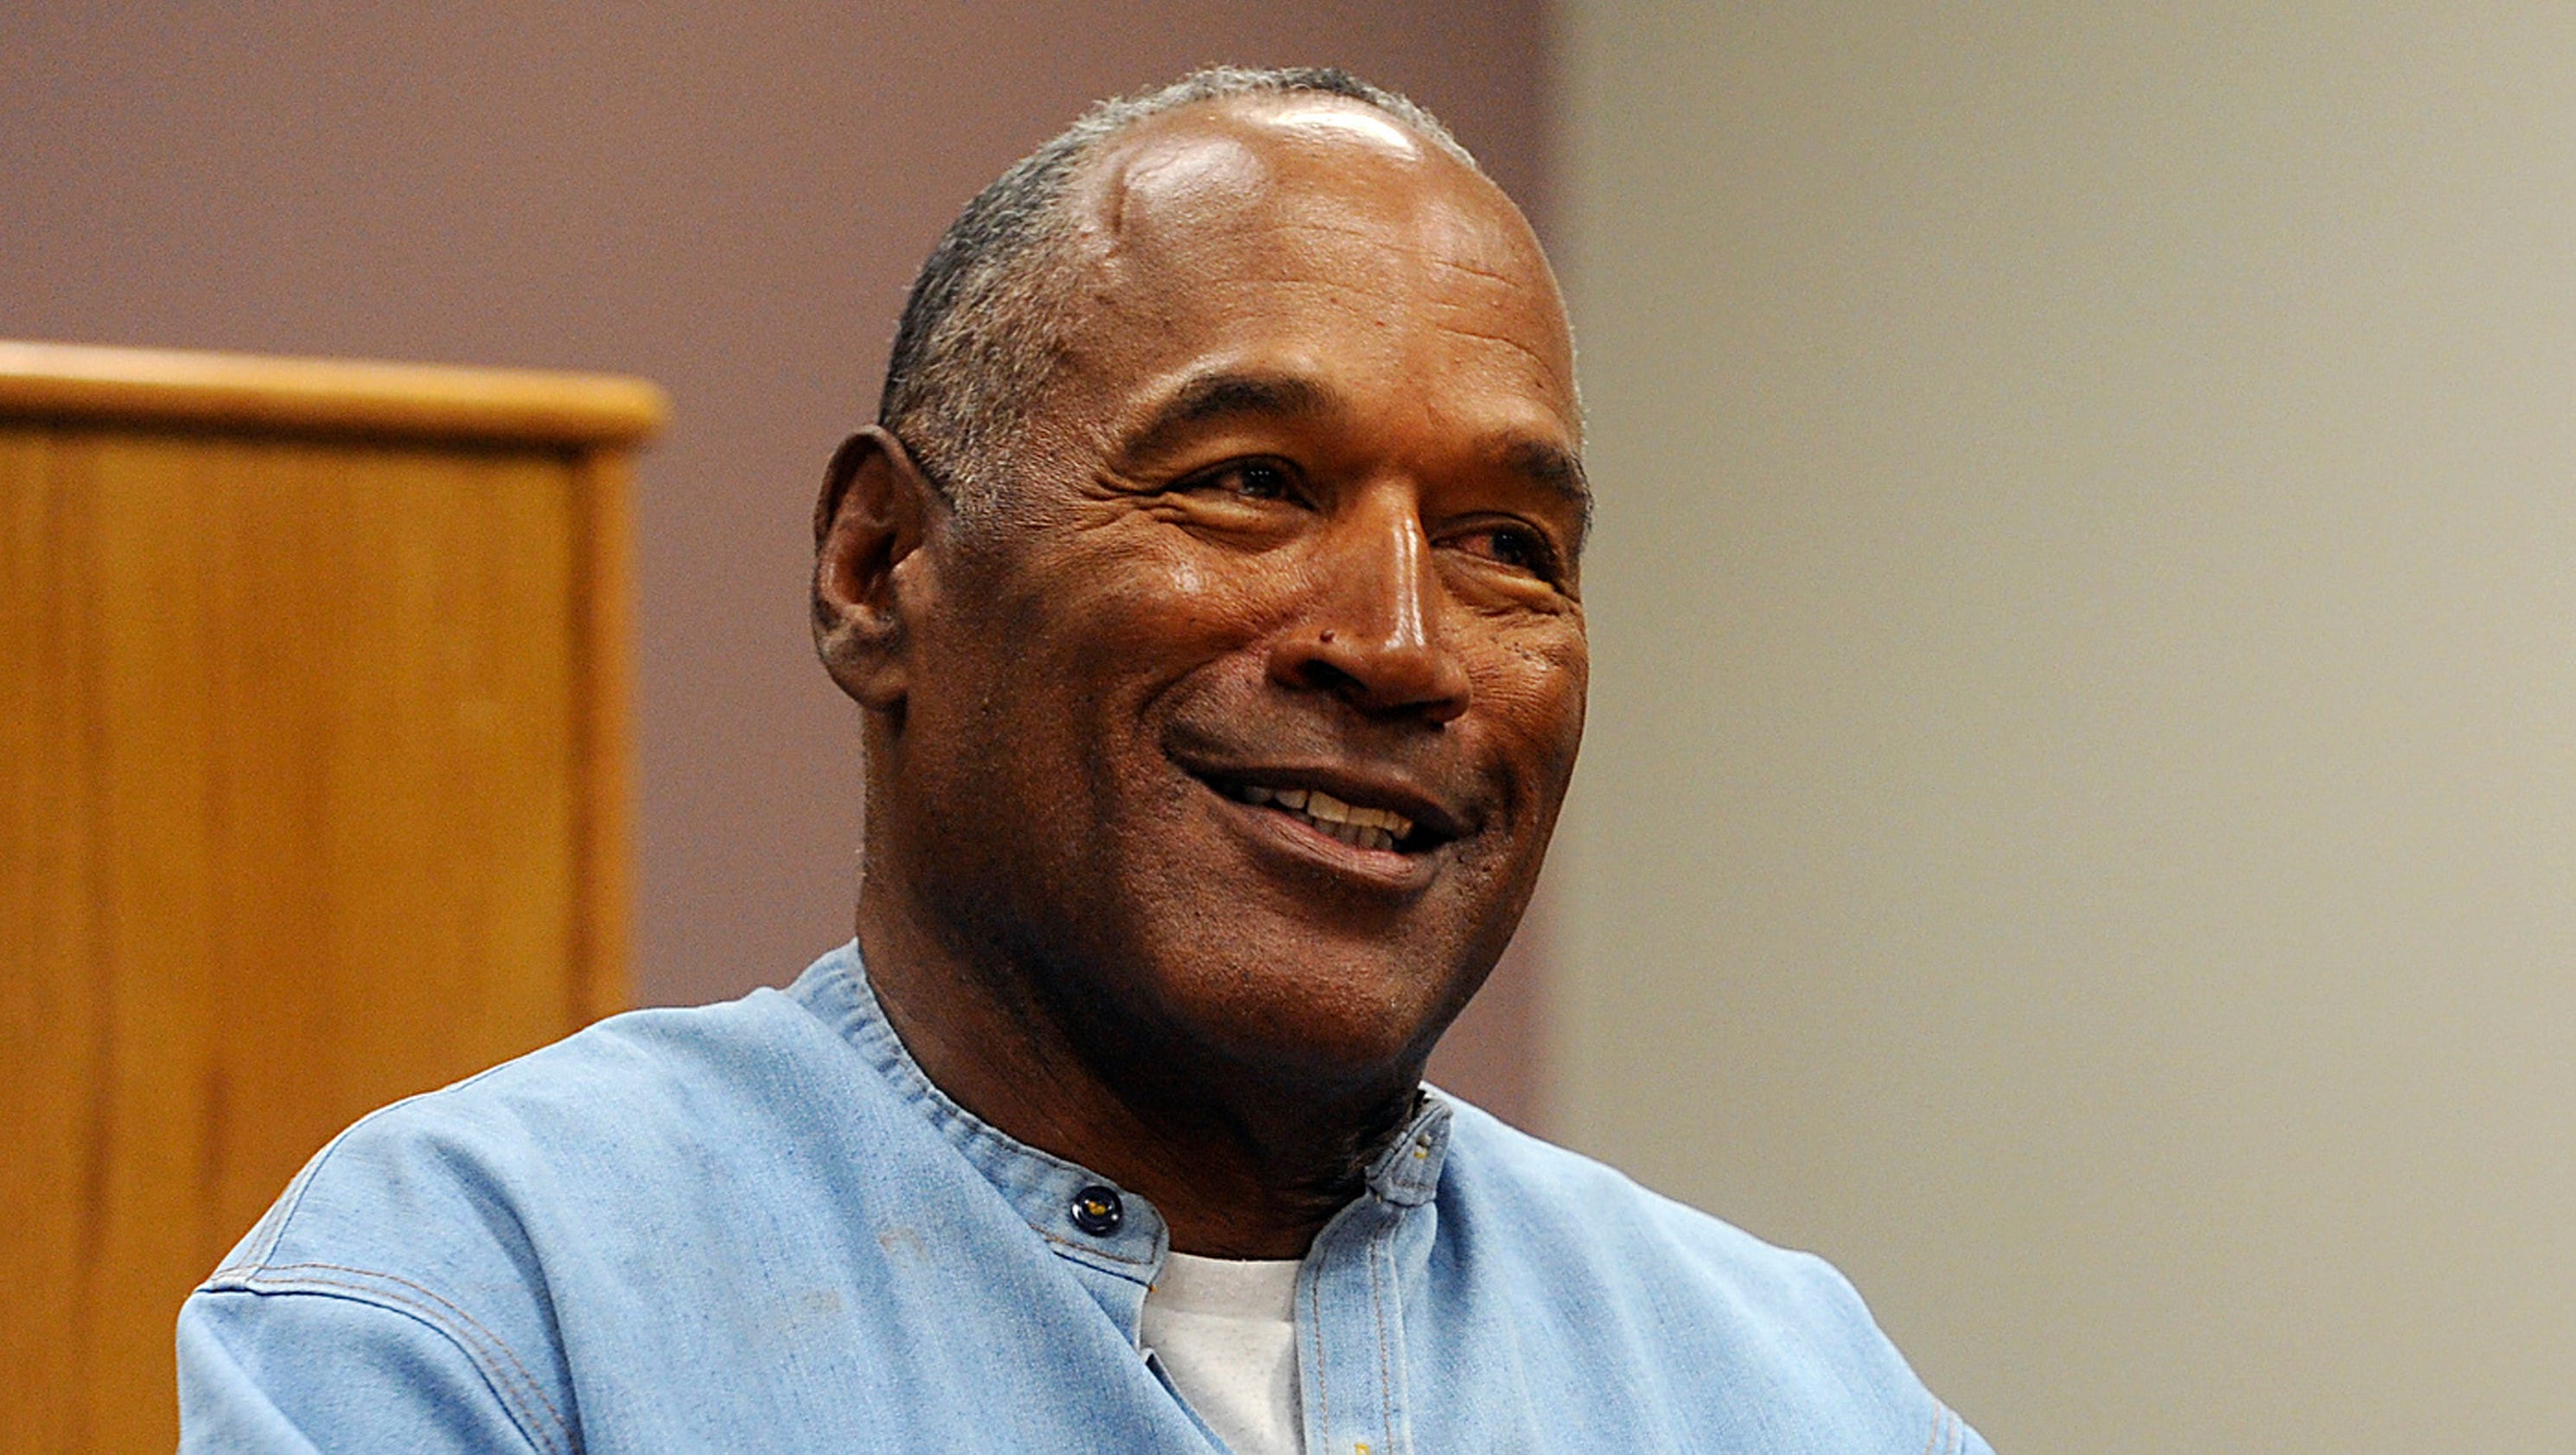 O.J. Simpson on prison: 'Nobody would think about screwing with me'